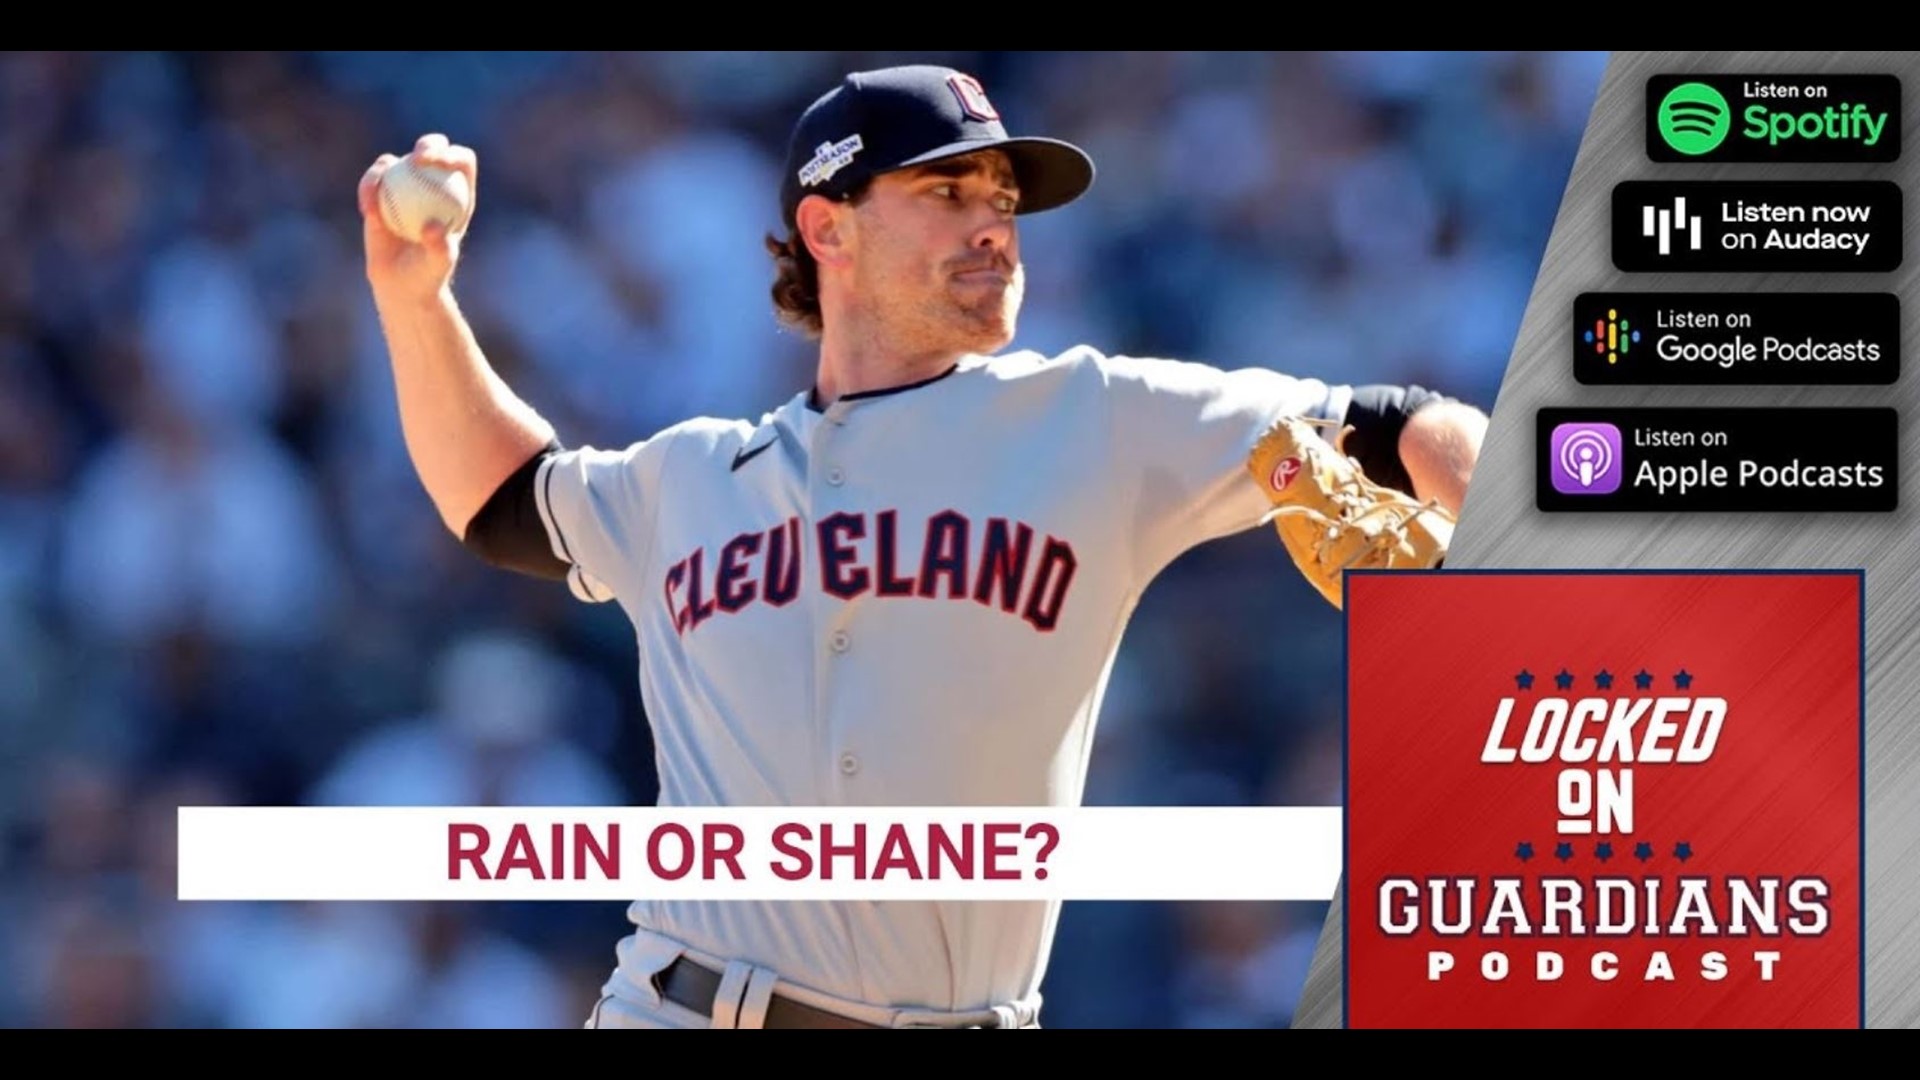 We debate the impacts of yet another ALDS rainout between the Yankees and Guardians. Who does the rainout impact more? Who does the rainout benefit most?